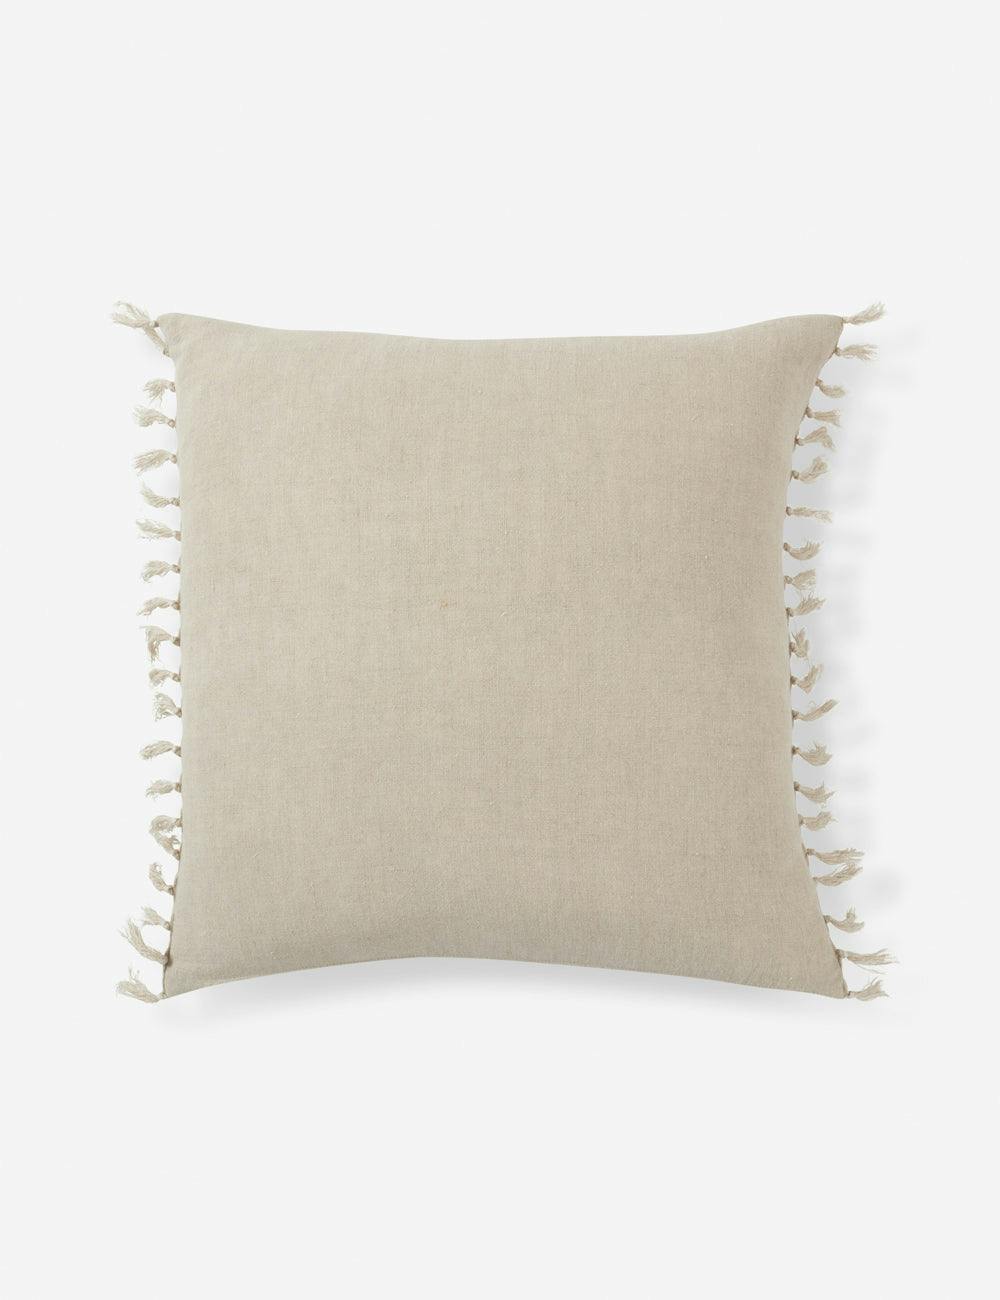 Roy Majere Handmade Linen Round Pillow with Tassels - Gray, 20"